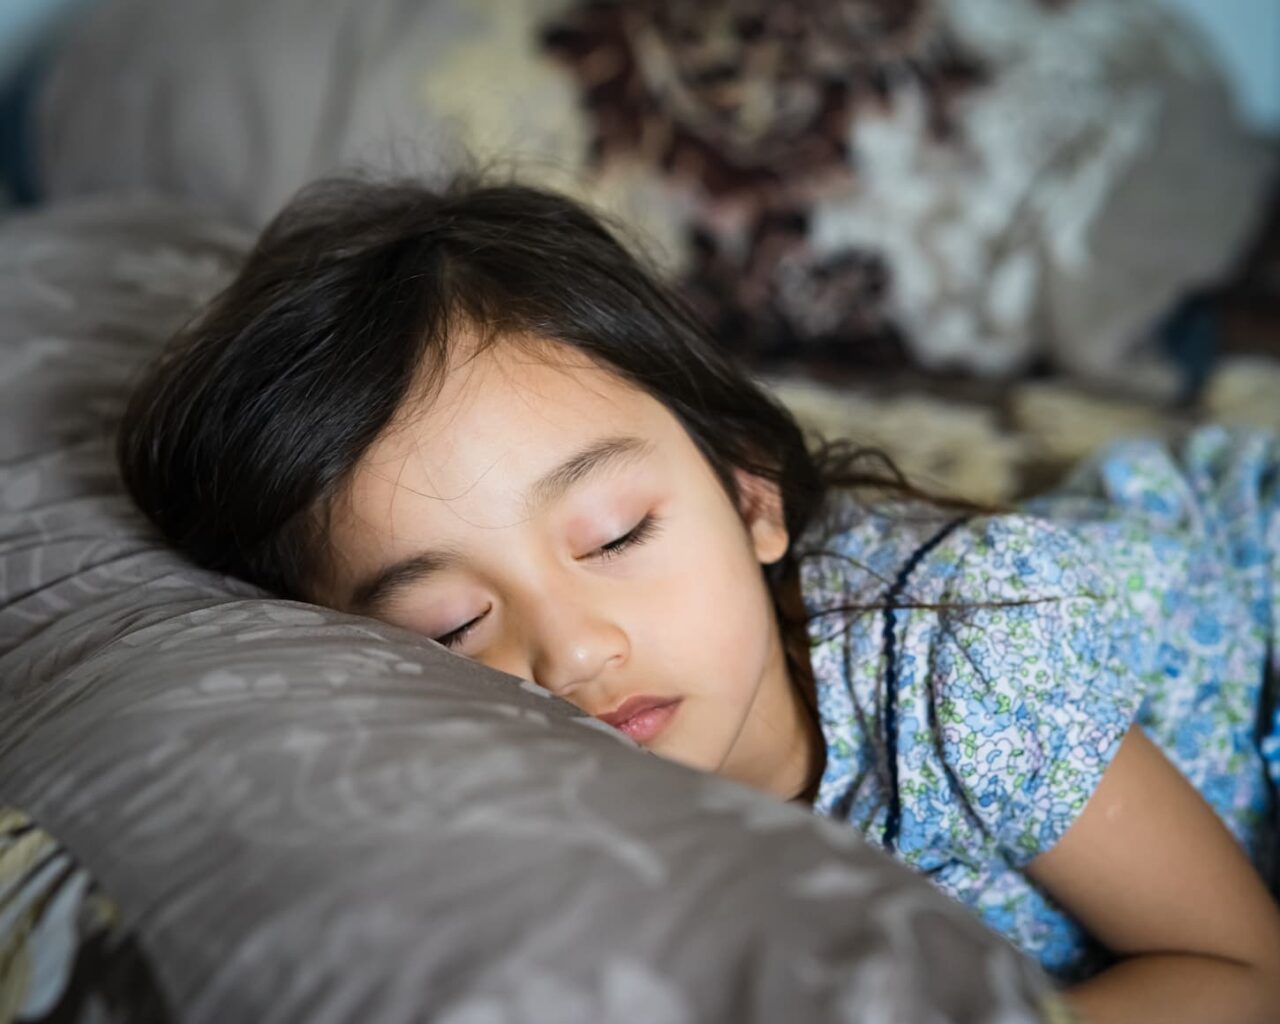 An image of a Daytime sleeping time of a toddler child on the bed.